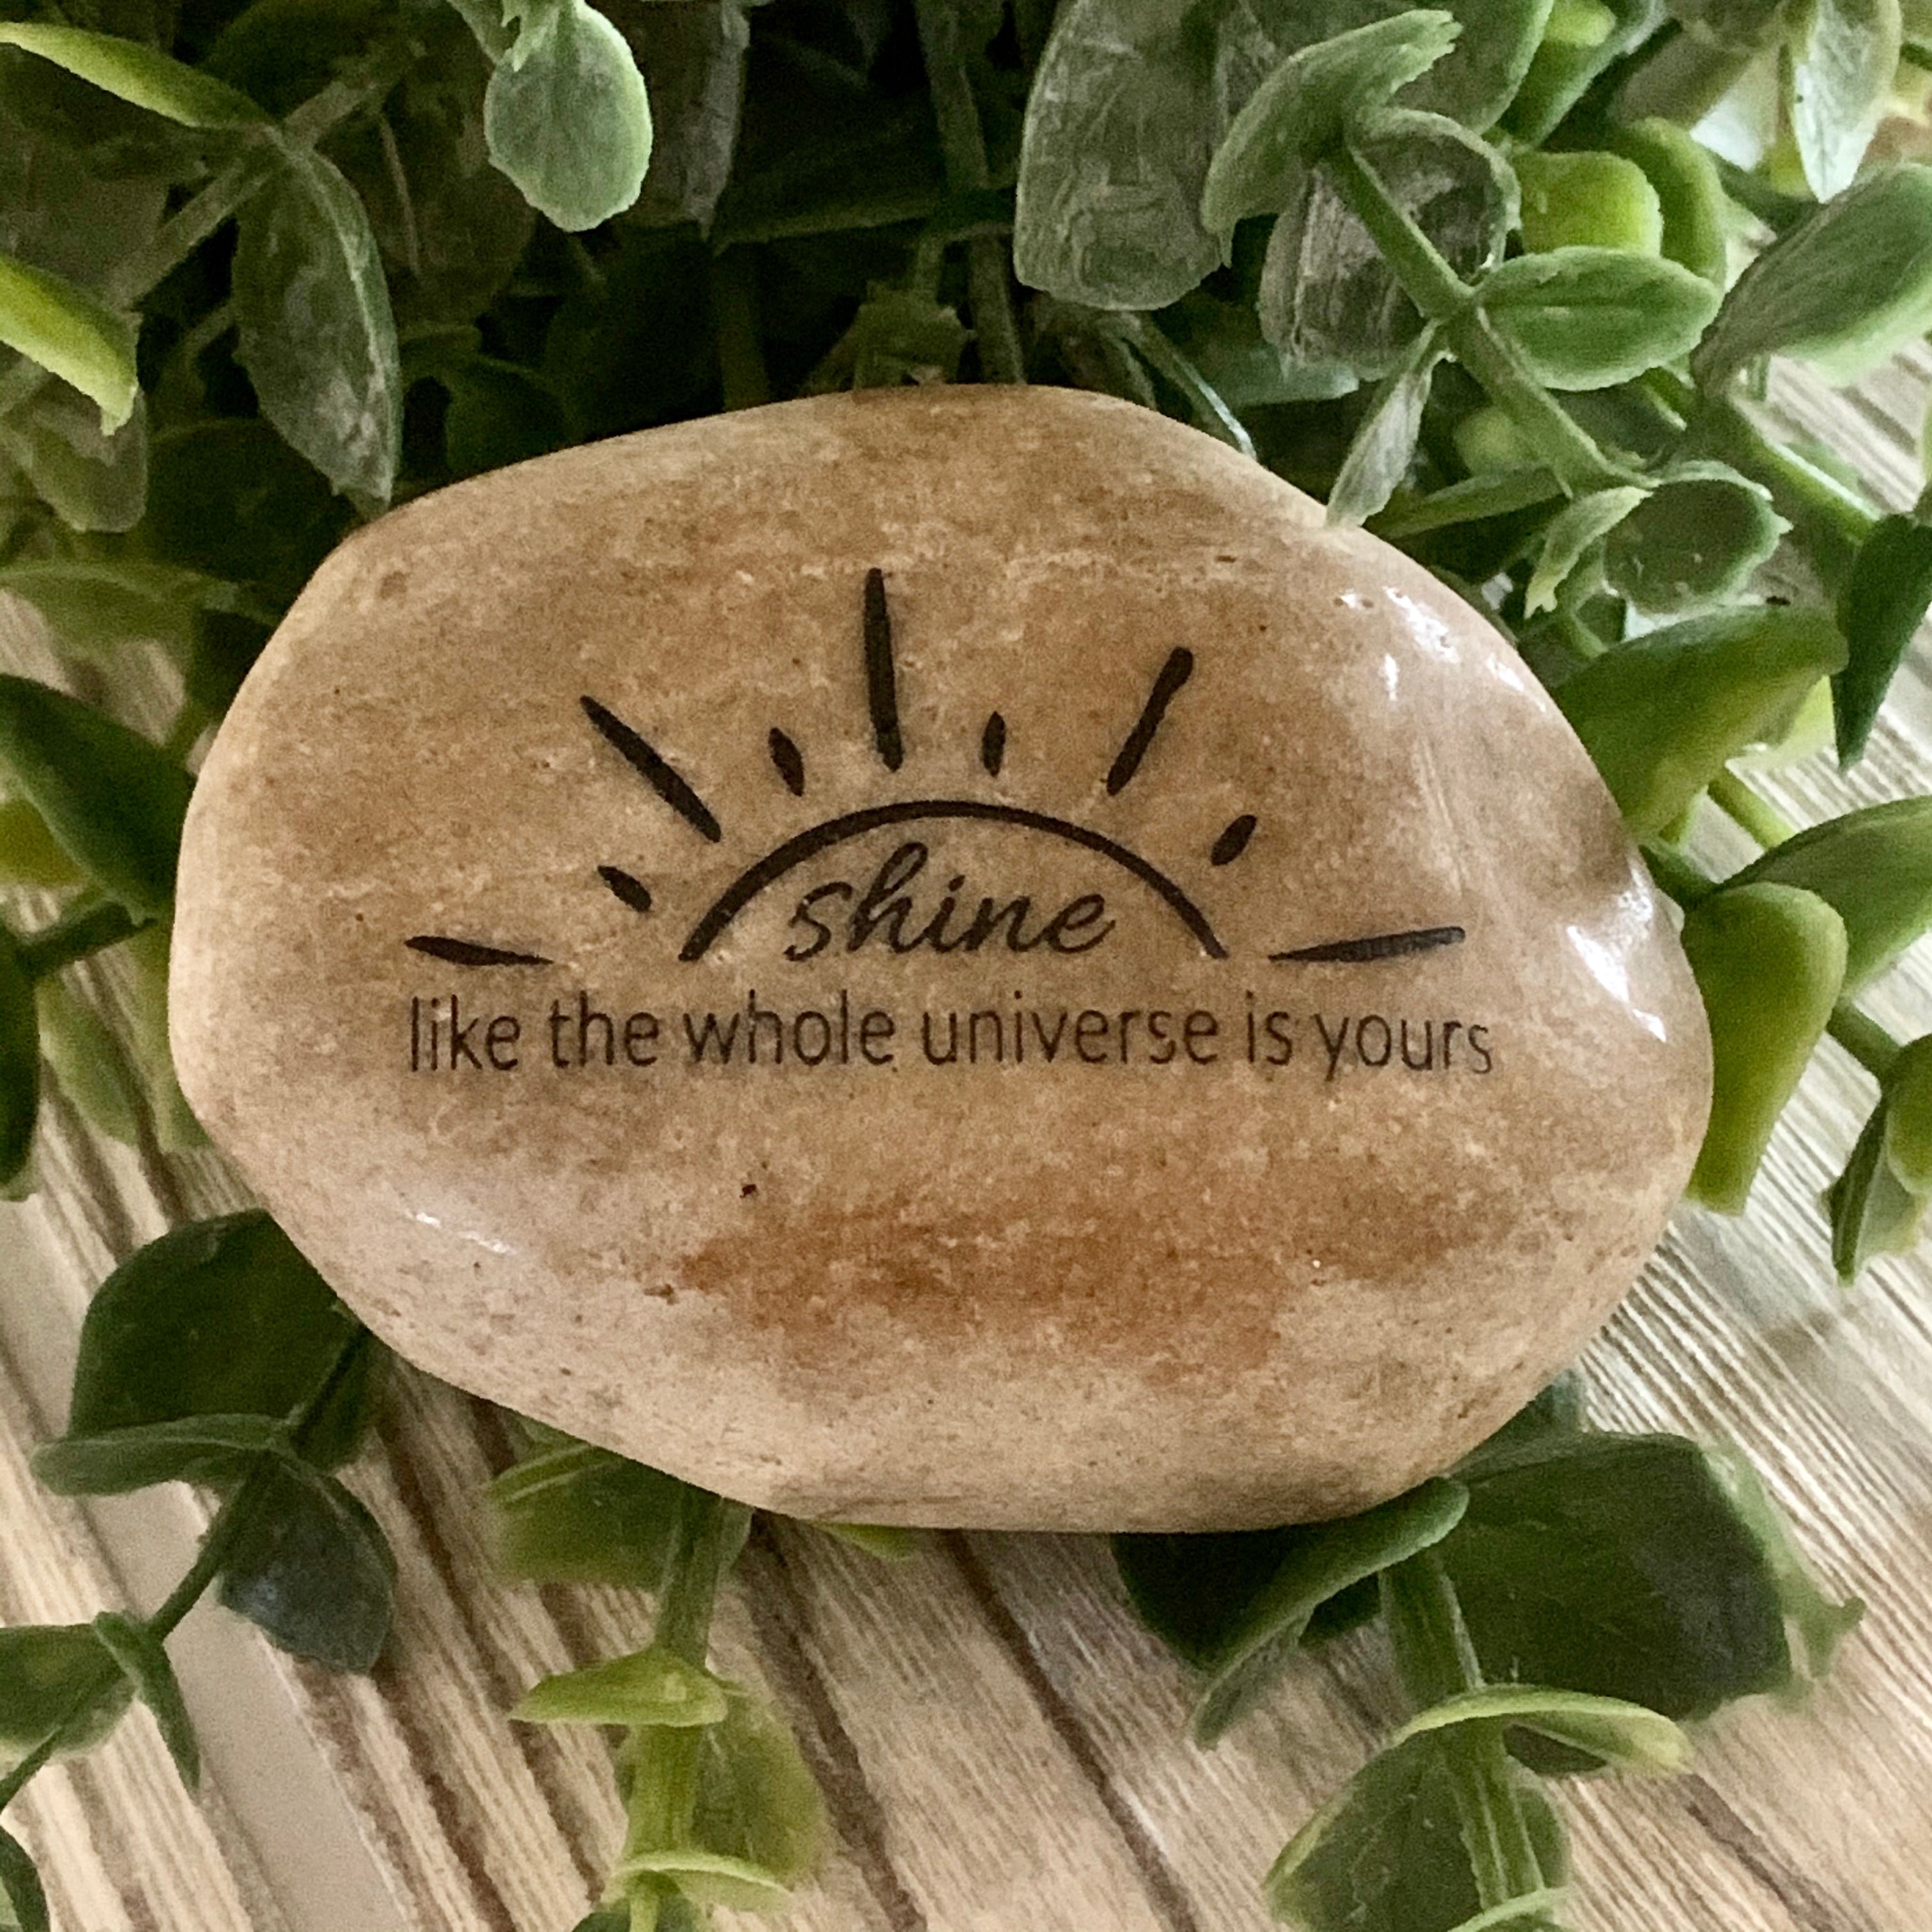 Shine Like The Whole Universe is Yours ~ Engraved Inspirational Rock